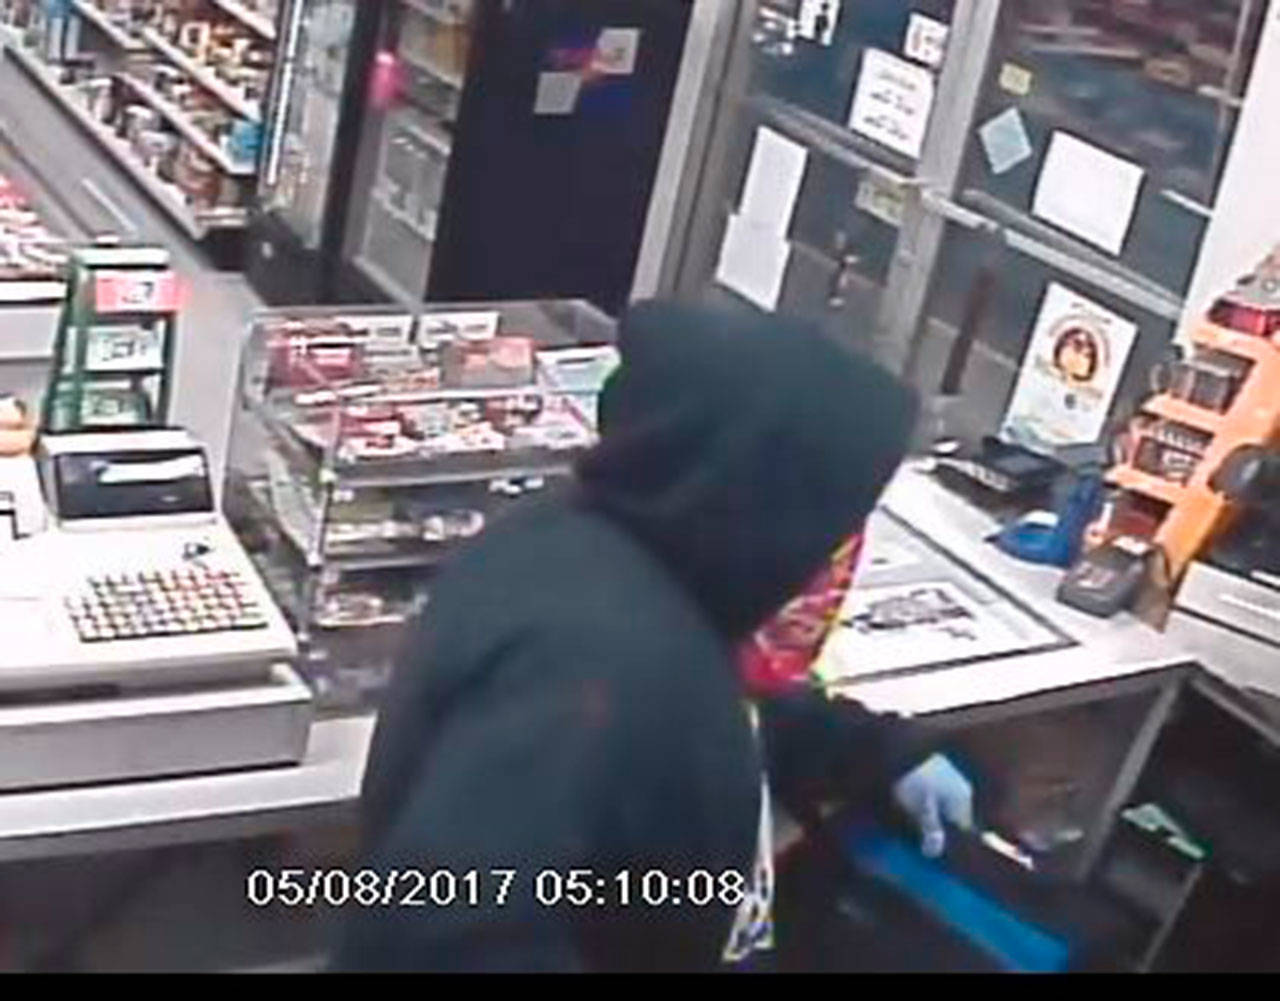 This image from surveillance footage shows a robbery suspect in a Port Angeles business on Monday.